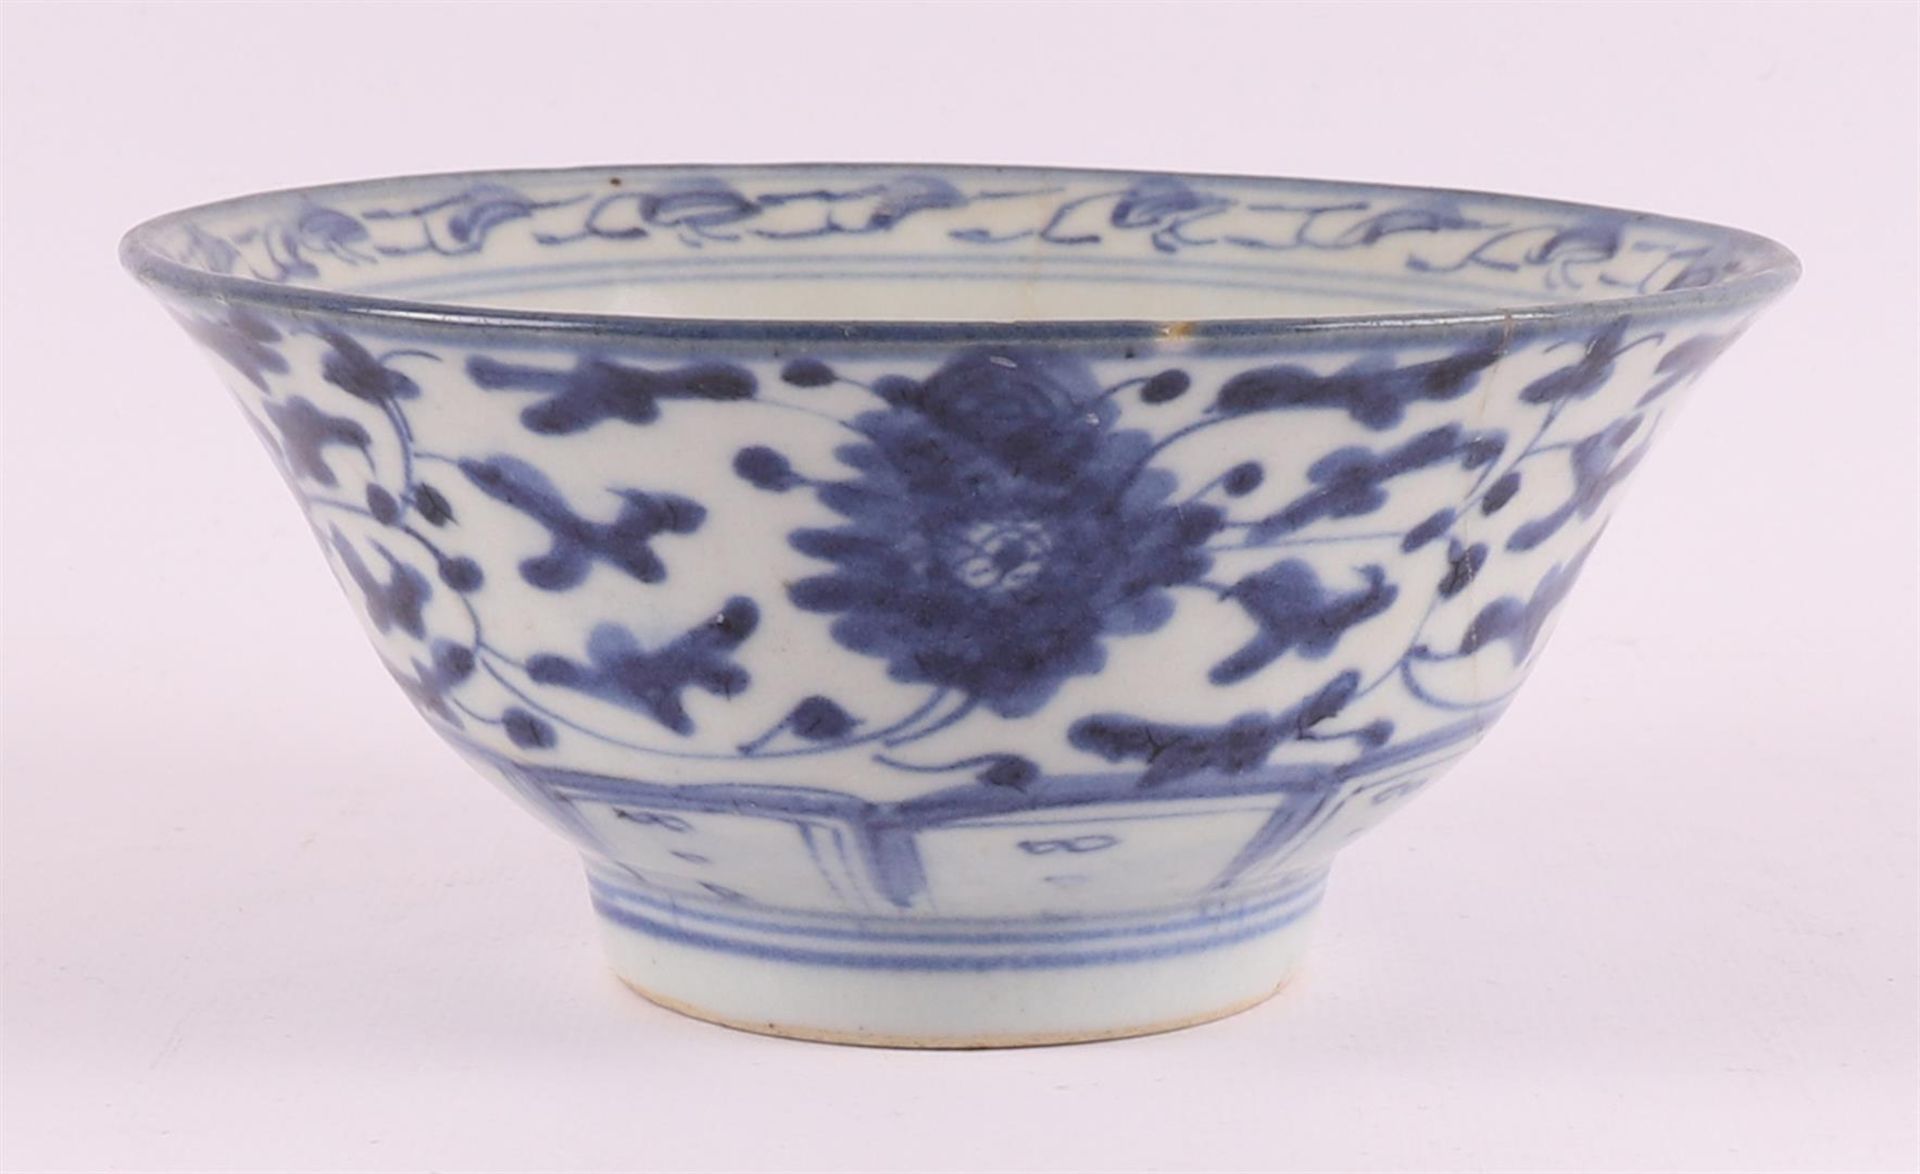 A lot of various Chinese porcelain bowls, China, 18th century - Image 21 of 25